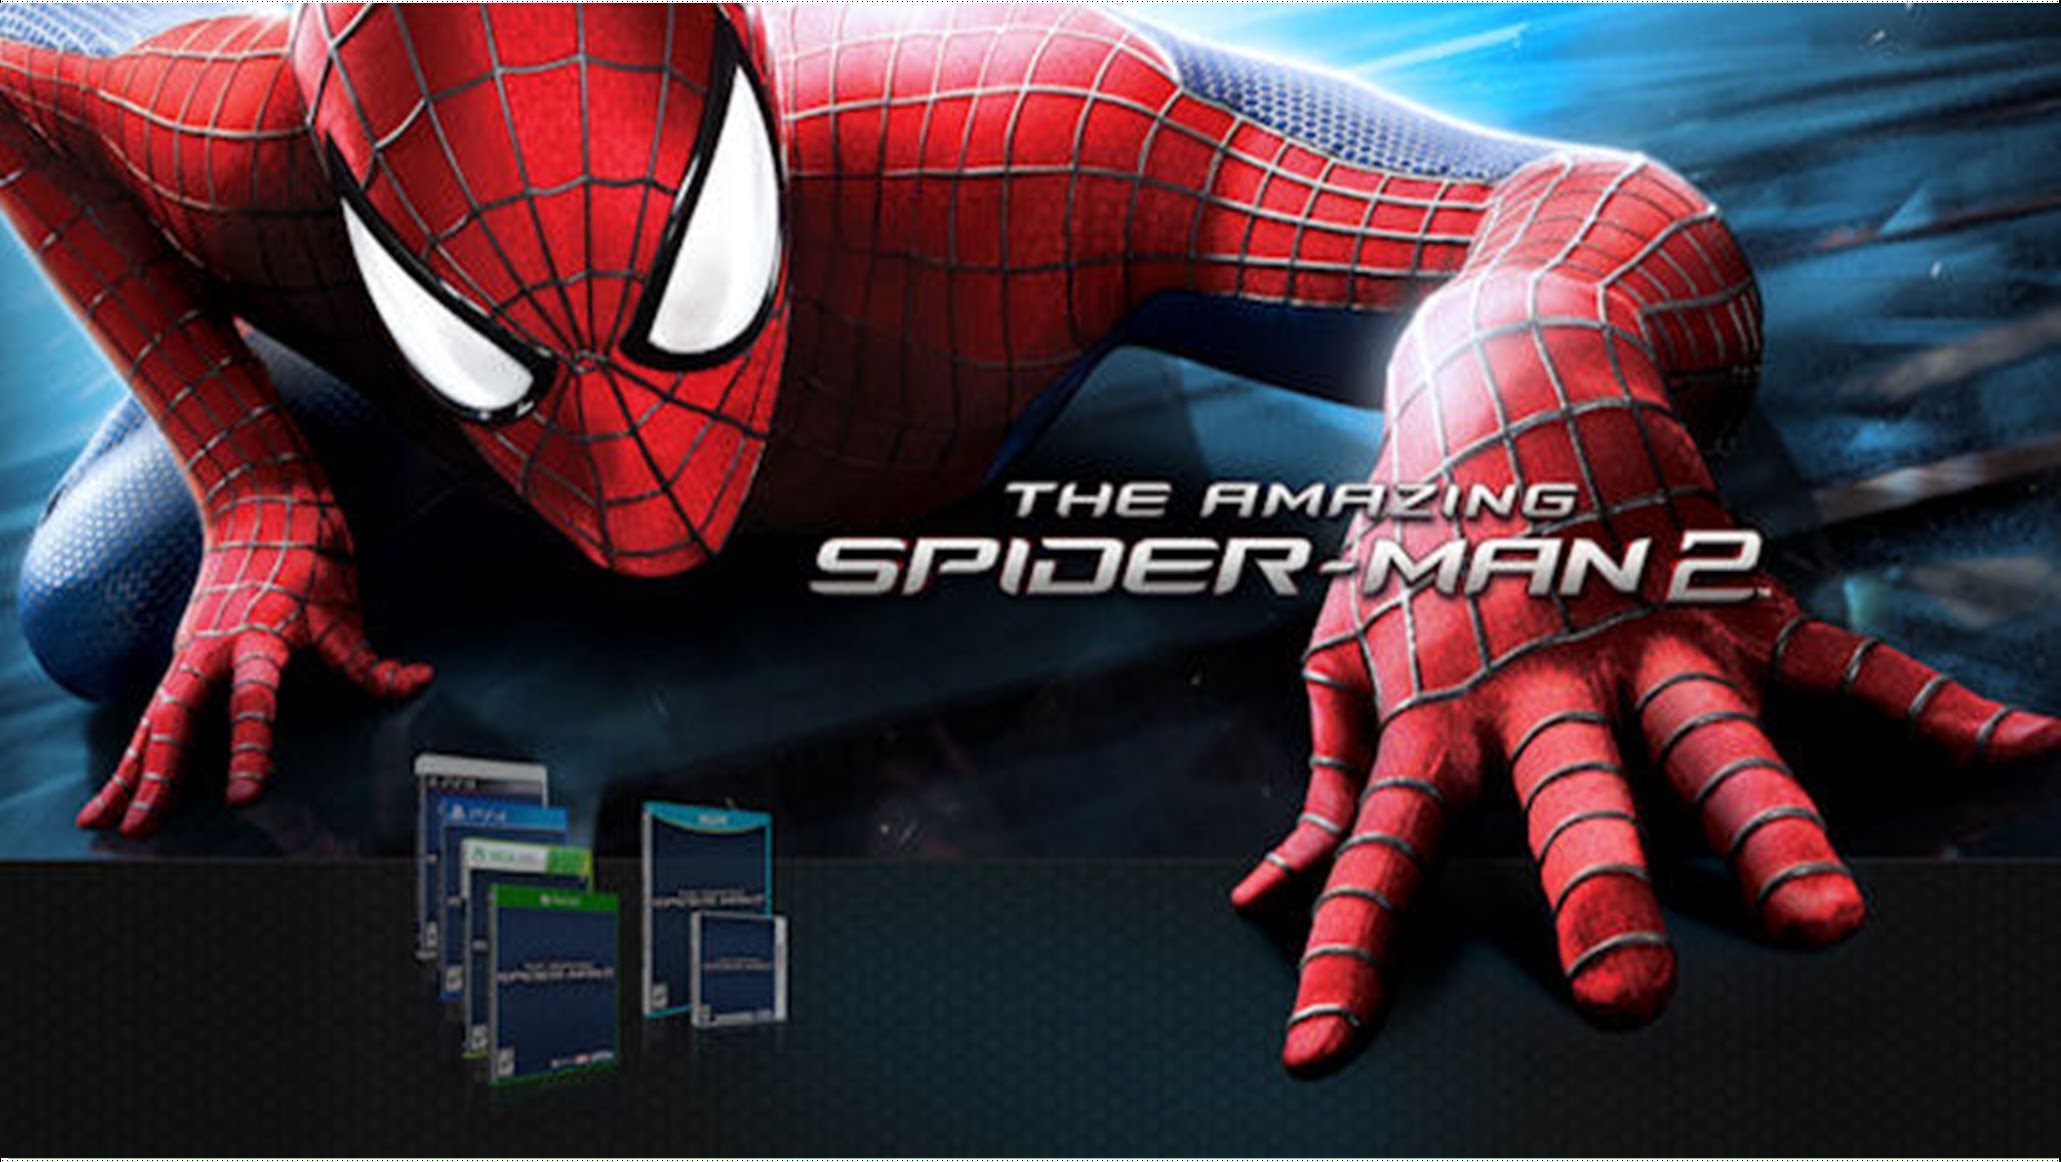 the amazing spider man 2 wallpaper hd | Desktop Backgrounds for ...